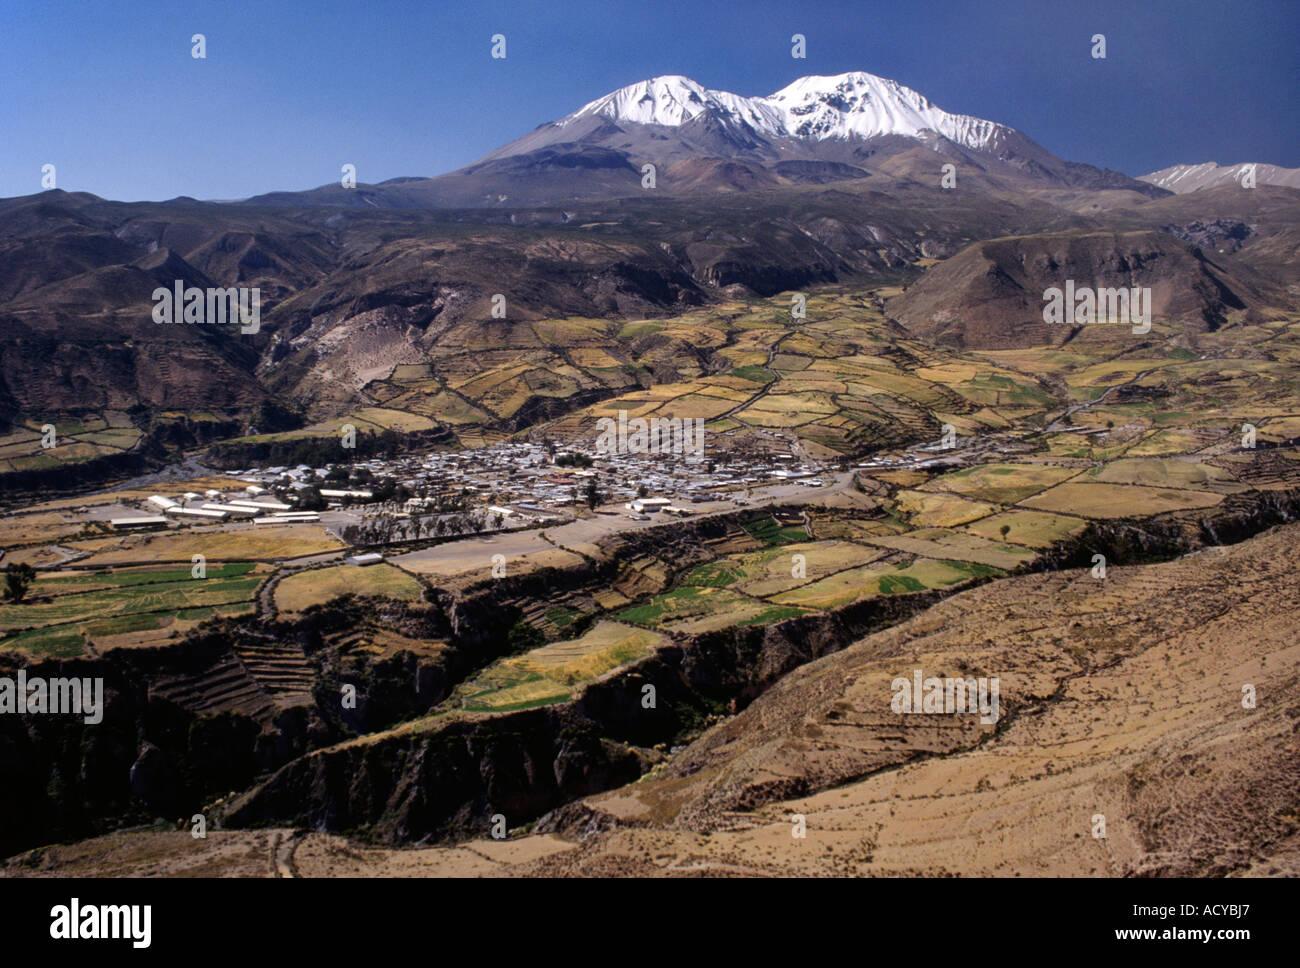 The AYMARA village of PUTRE sits at 11 400 feet elevation on the outskirts of LAUCA NATIONAL PARK NORTHERN CHILE Stock Photo